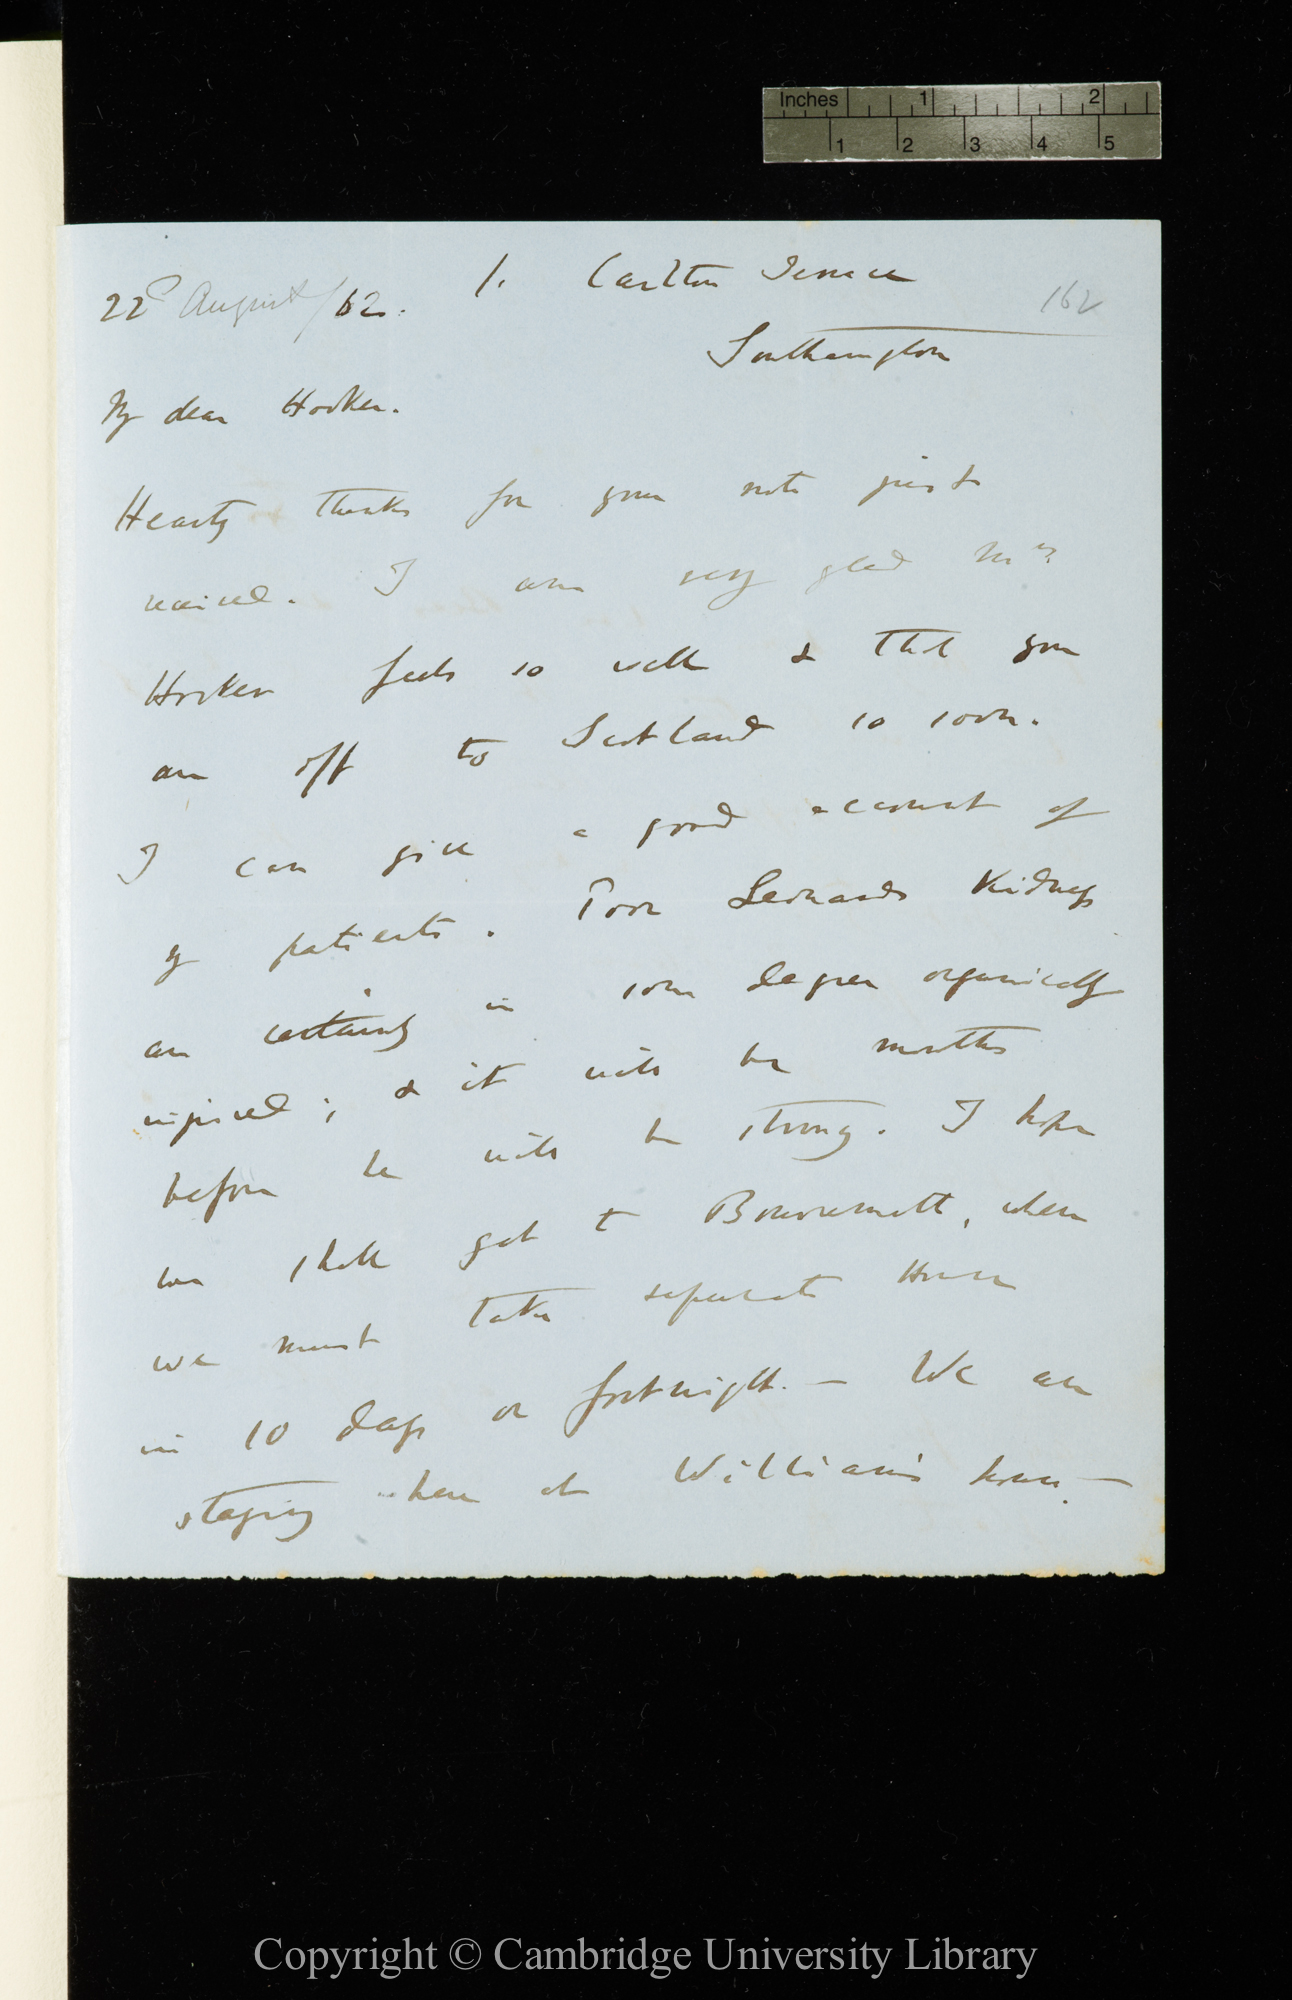 Letter from C. R. Darwin to J. D. Hooker   22 [August 1862]